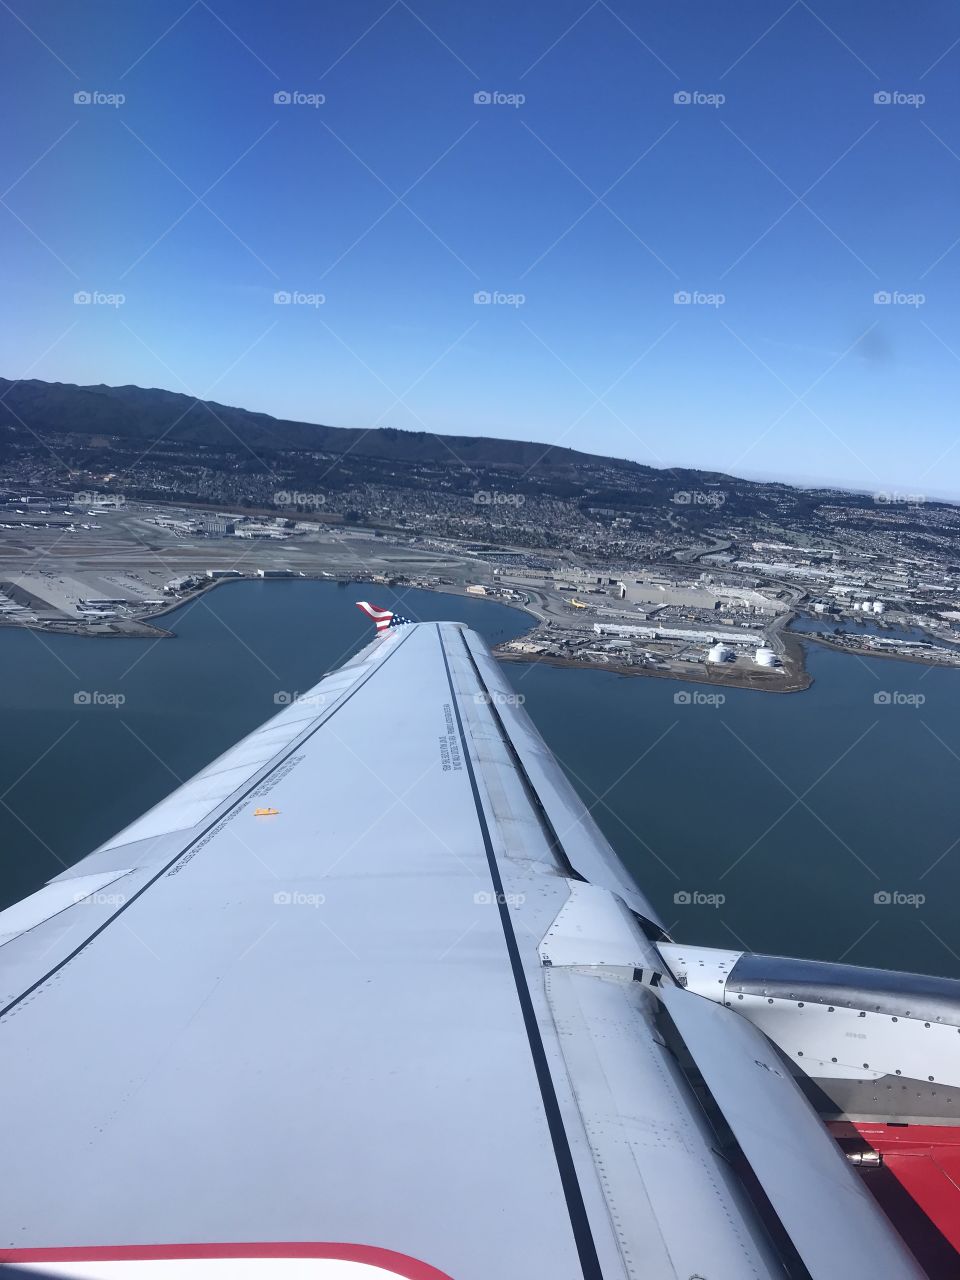 Takeoff from San Francisco 